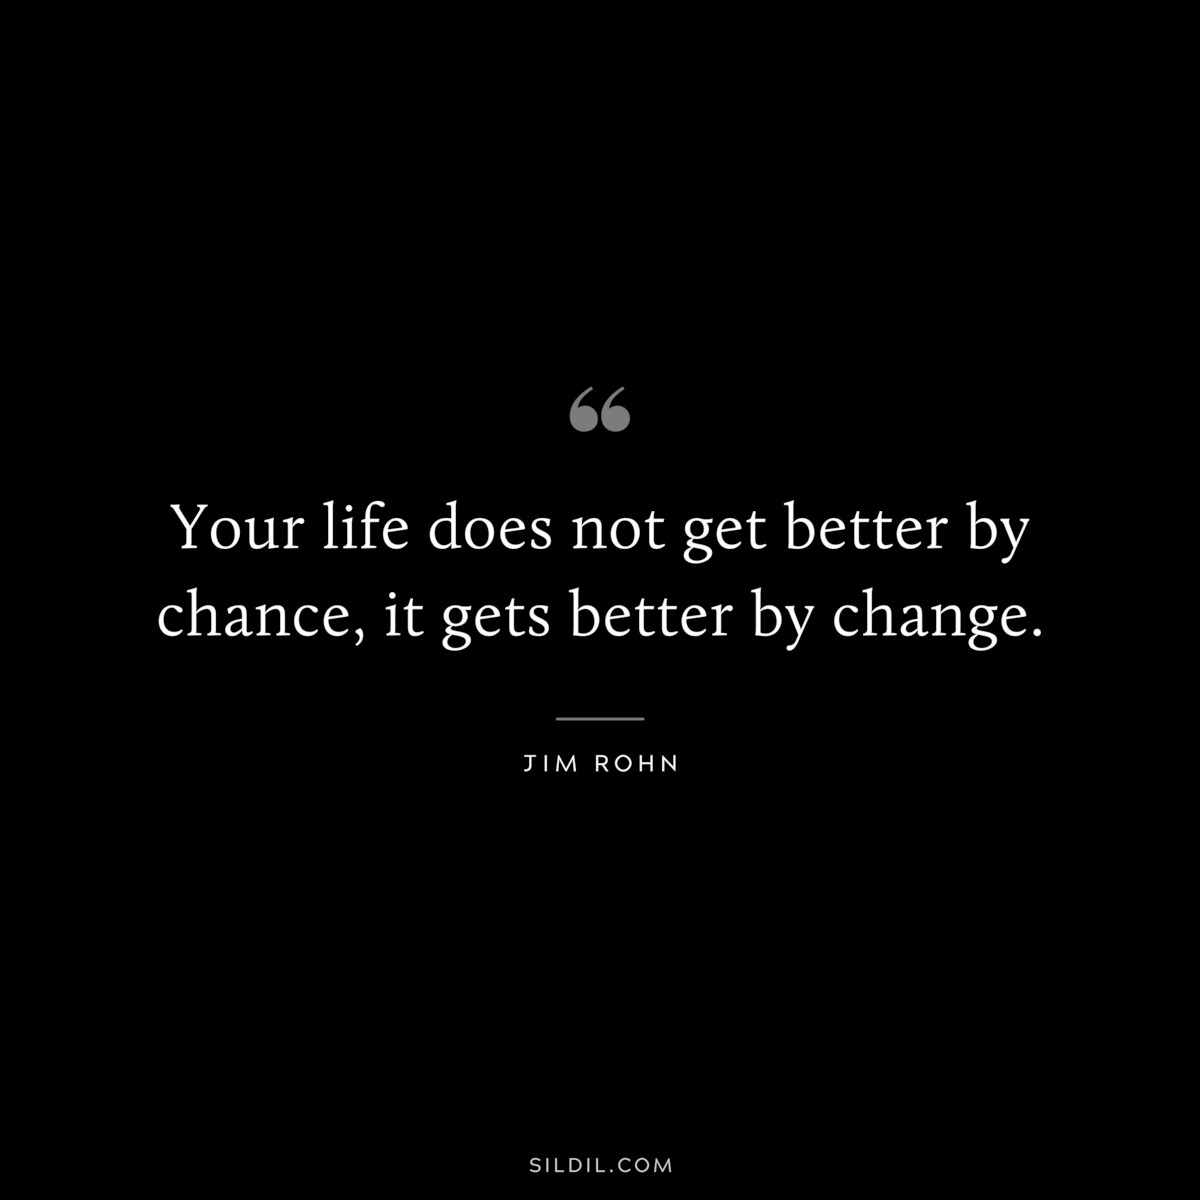 Your life does not get better by chance, it gets better by change. ― Jim Rohn